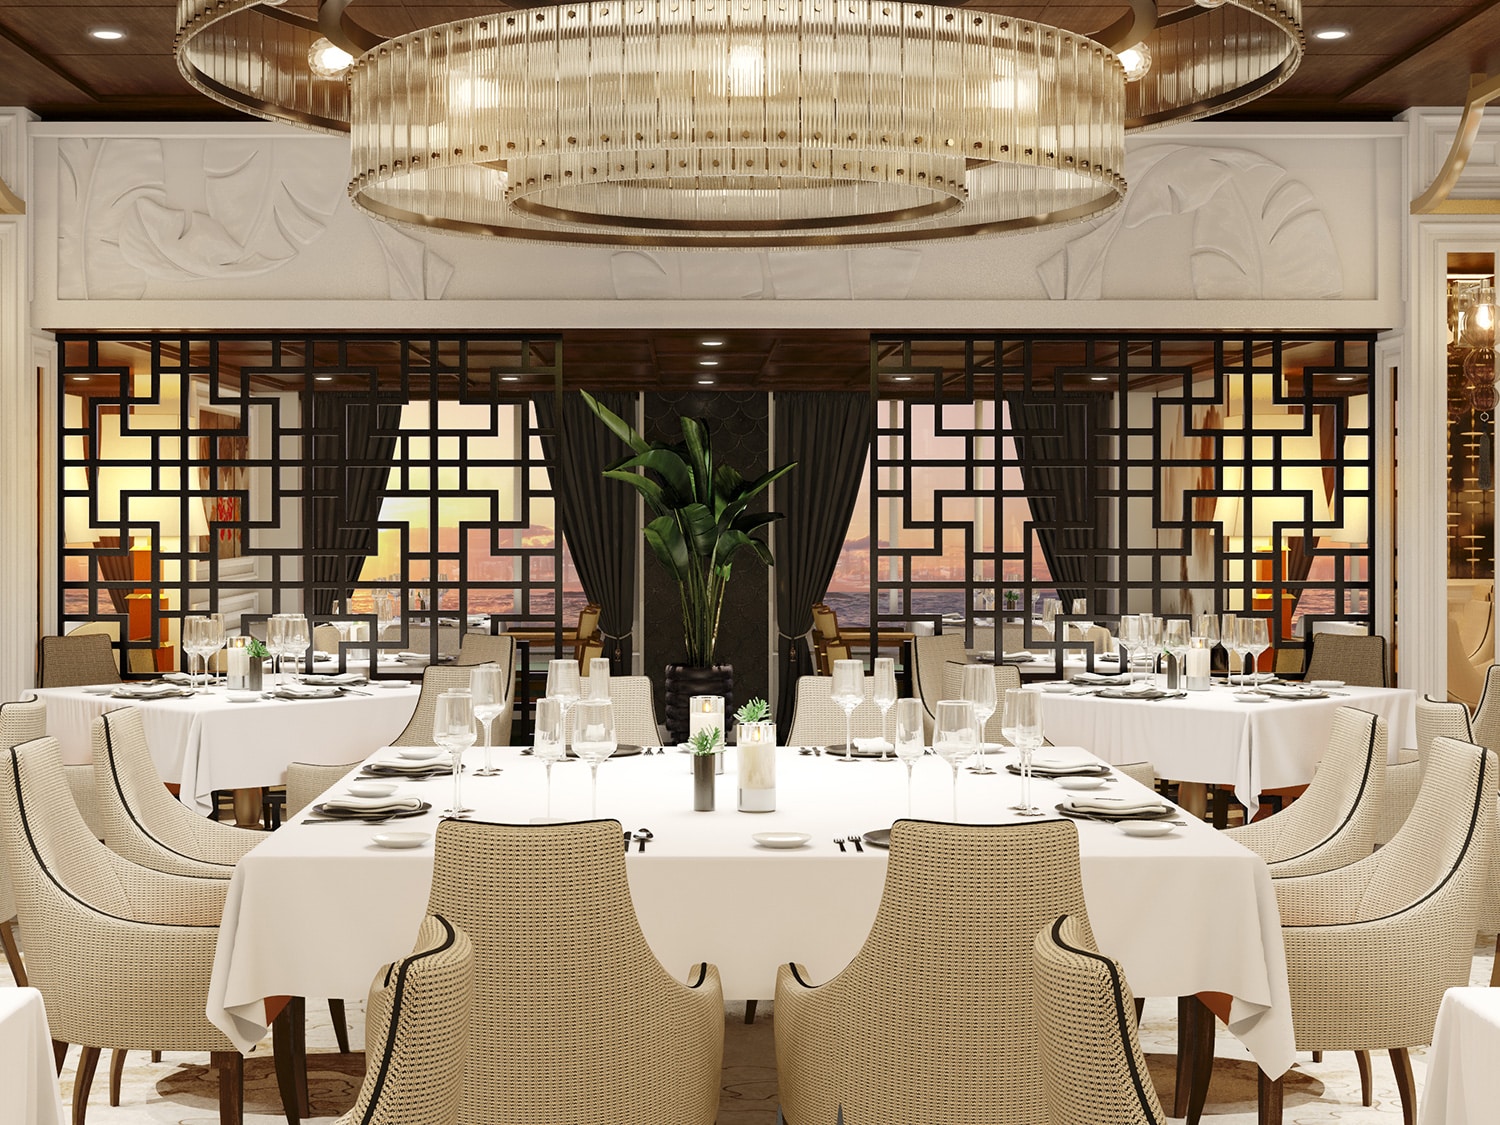 The Red Ginger dining concept on the Oceania Vista cruise ship.